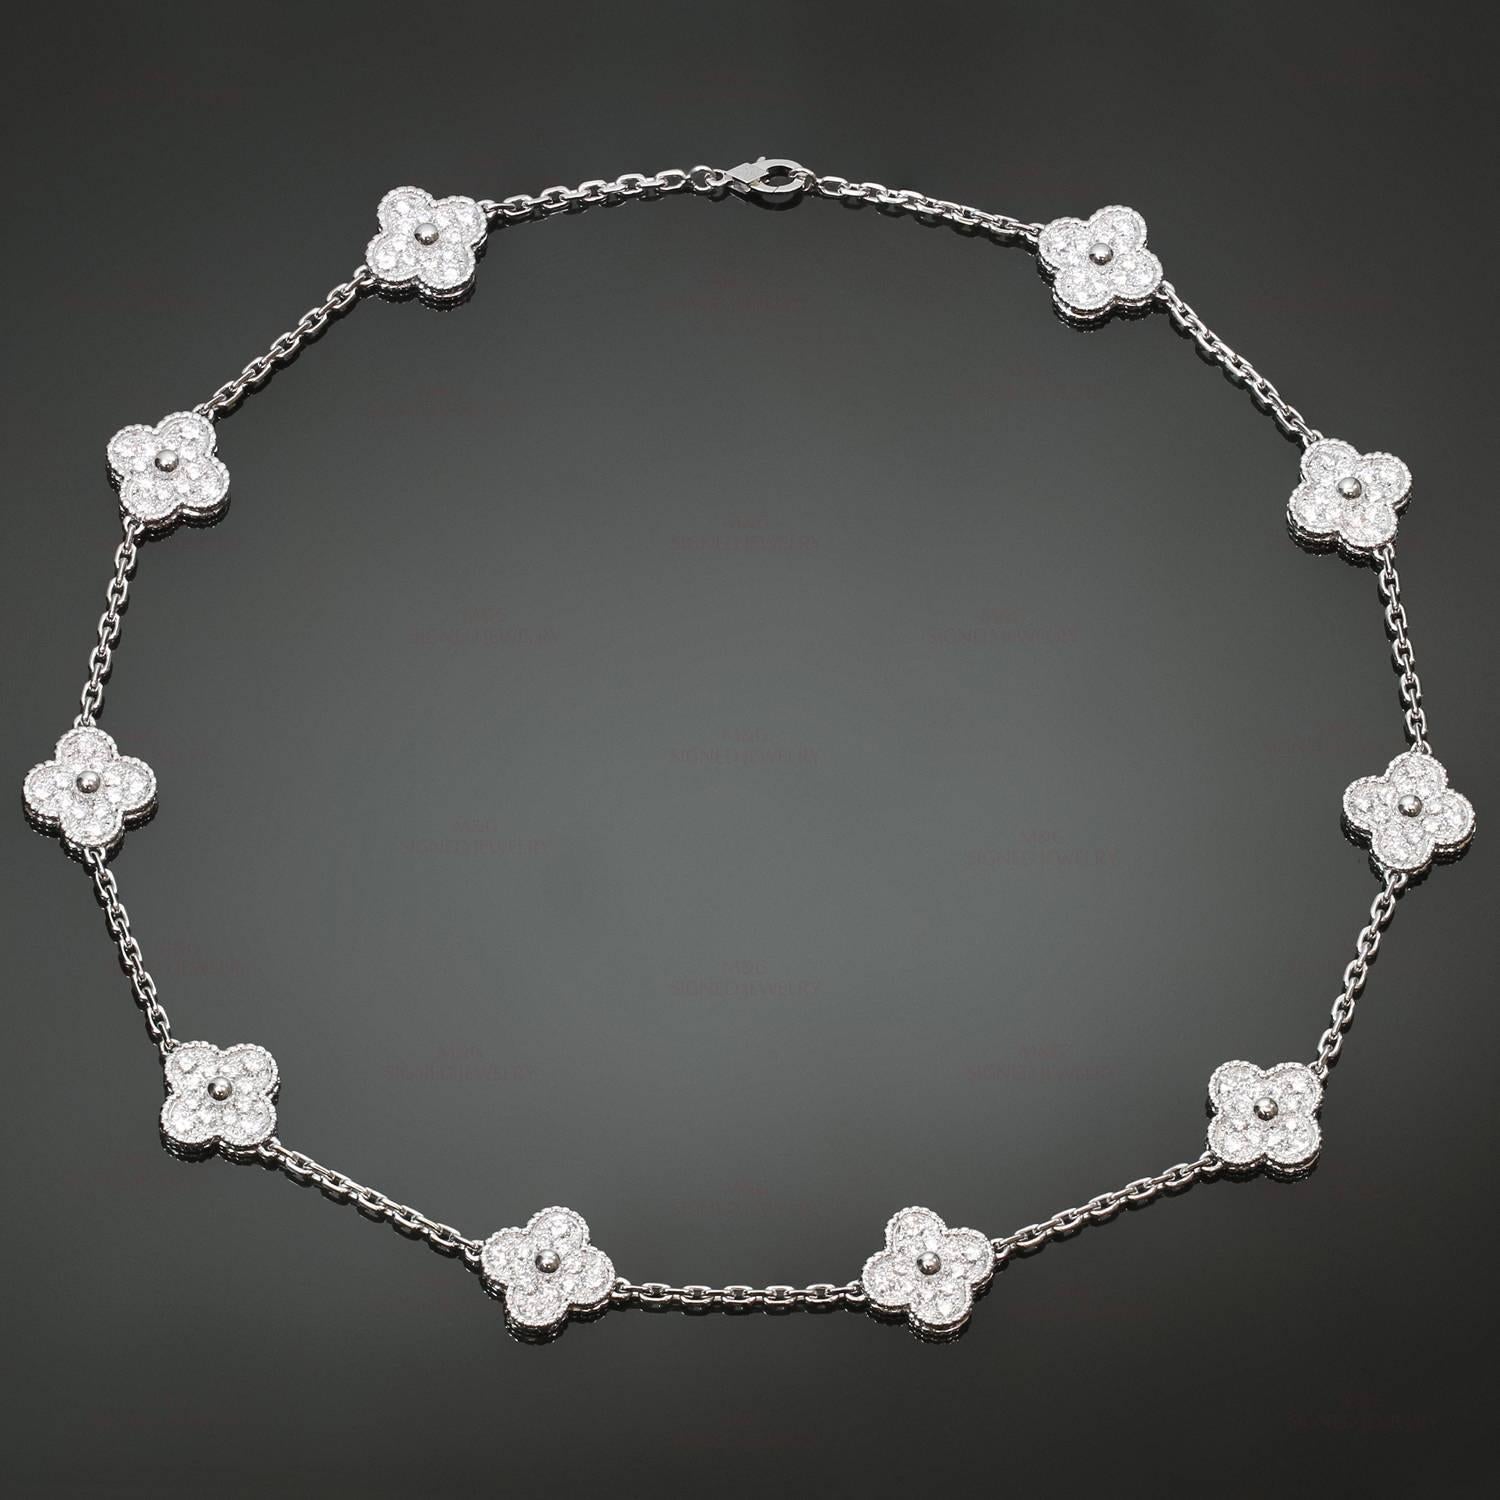 This classic like-new Van Cleef & Arpels necklace from the iconic Vintage Alhambra collection is crafted in 18k white gold and features 10 lucky clover motifs beautifully set with sparkling brilliant-cut round diamonds of an estimated 5.0